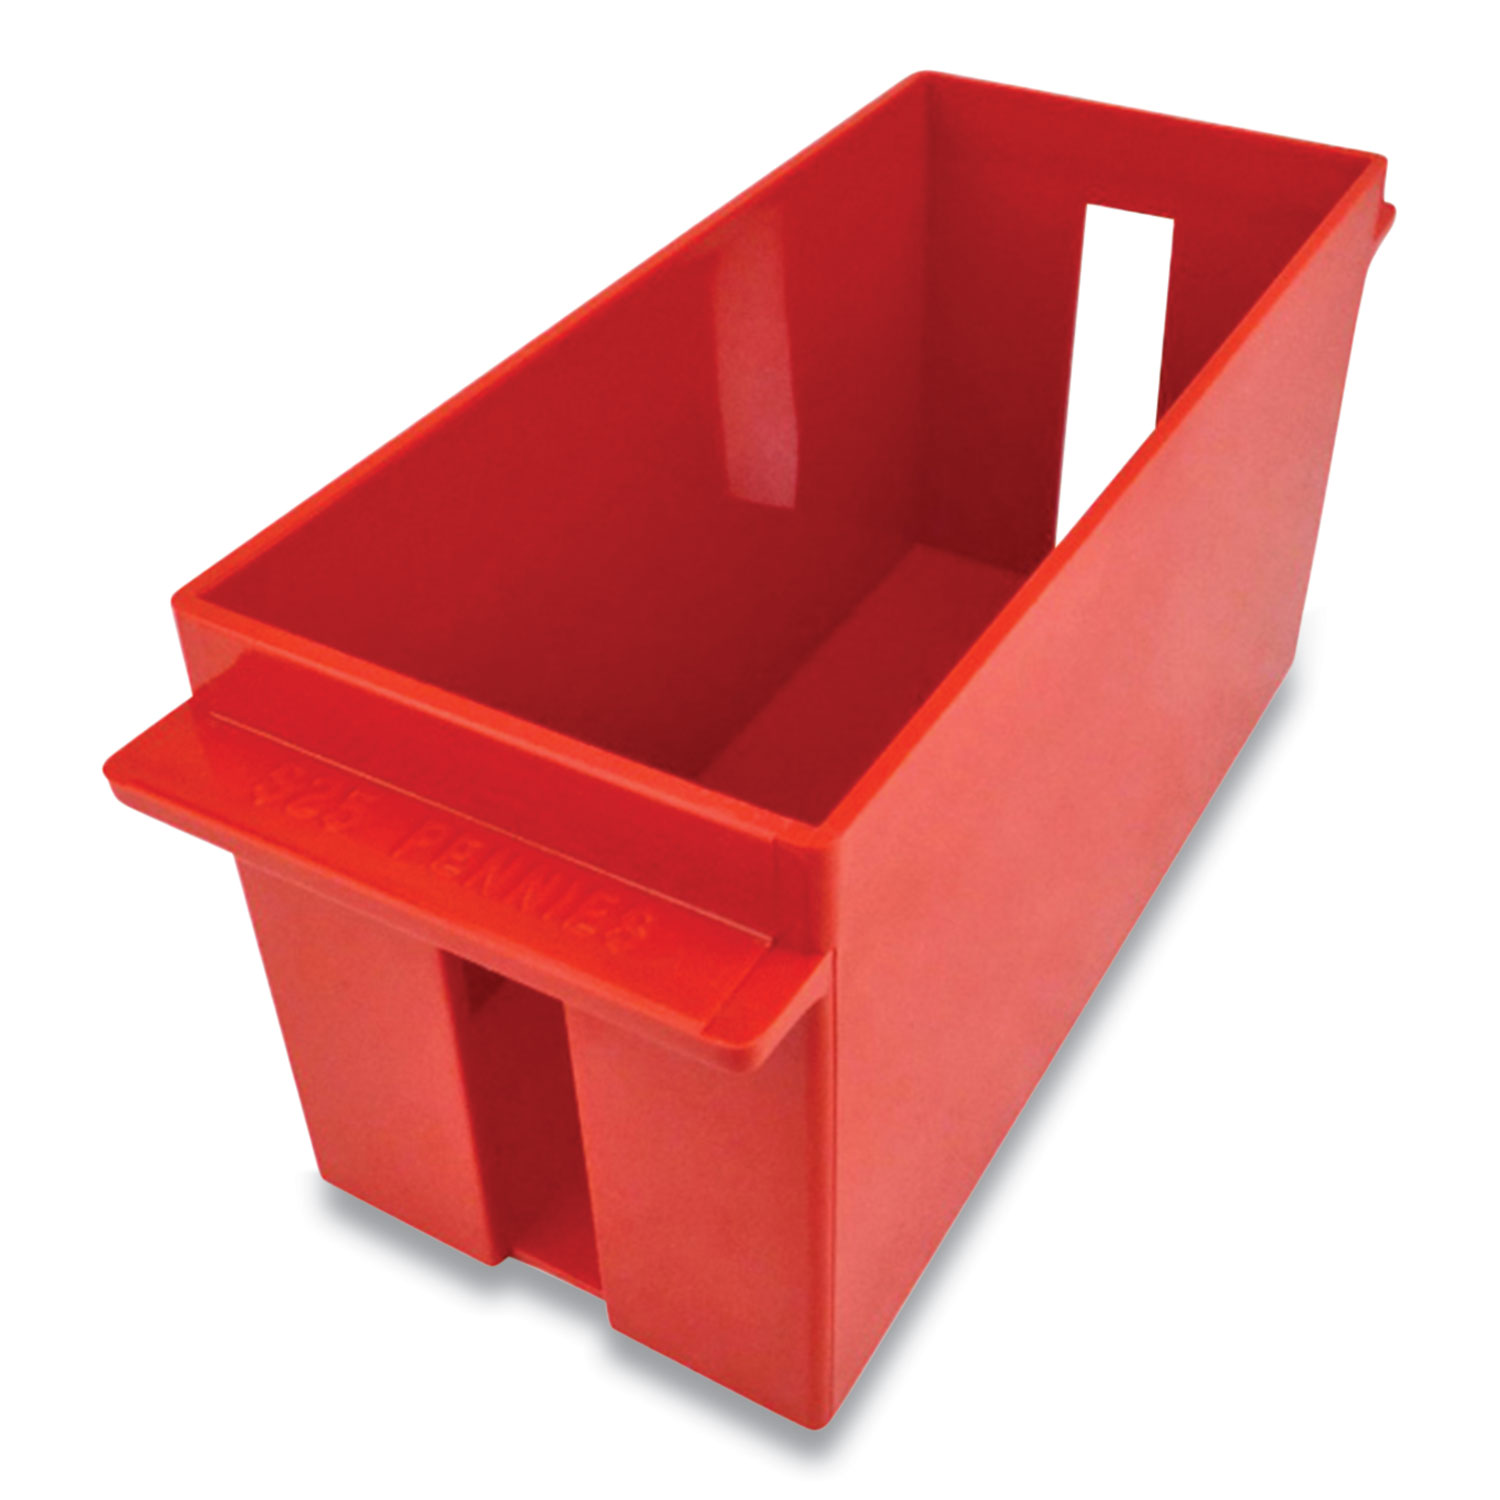  CONTROLTEK 560162 Coin Tray, Pennies, 1 Compartment, Red (CNK24421367) 